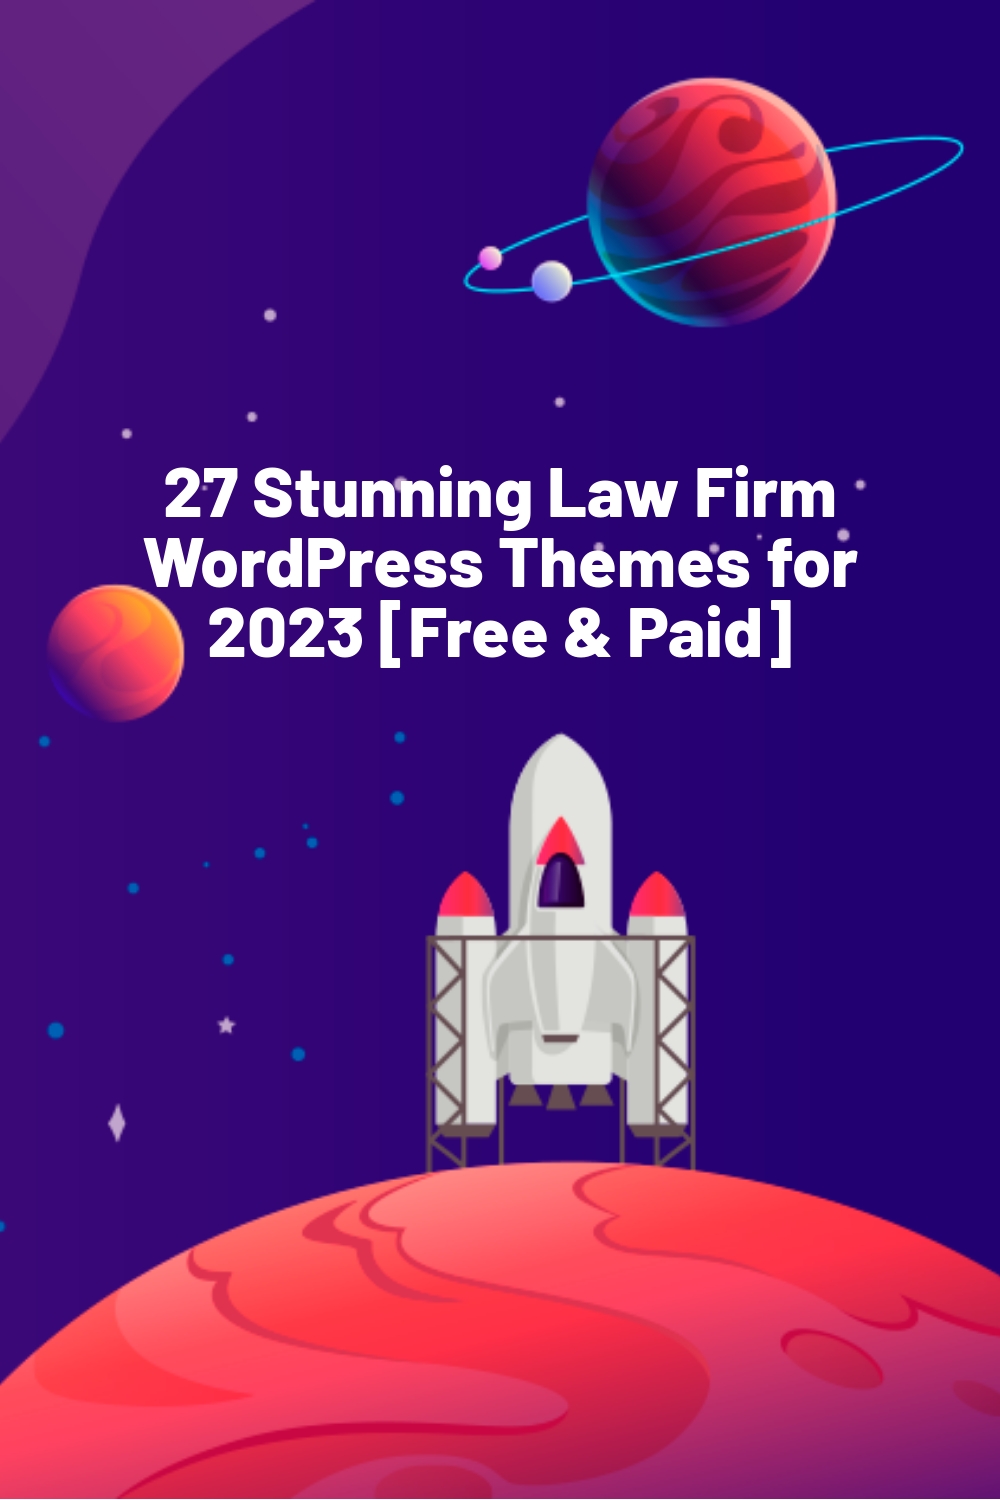 27 Stunning Law Firm WordPress Themes for 2023 [Free & Paid]